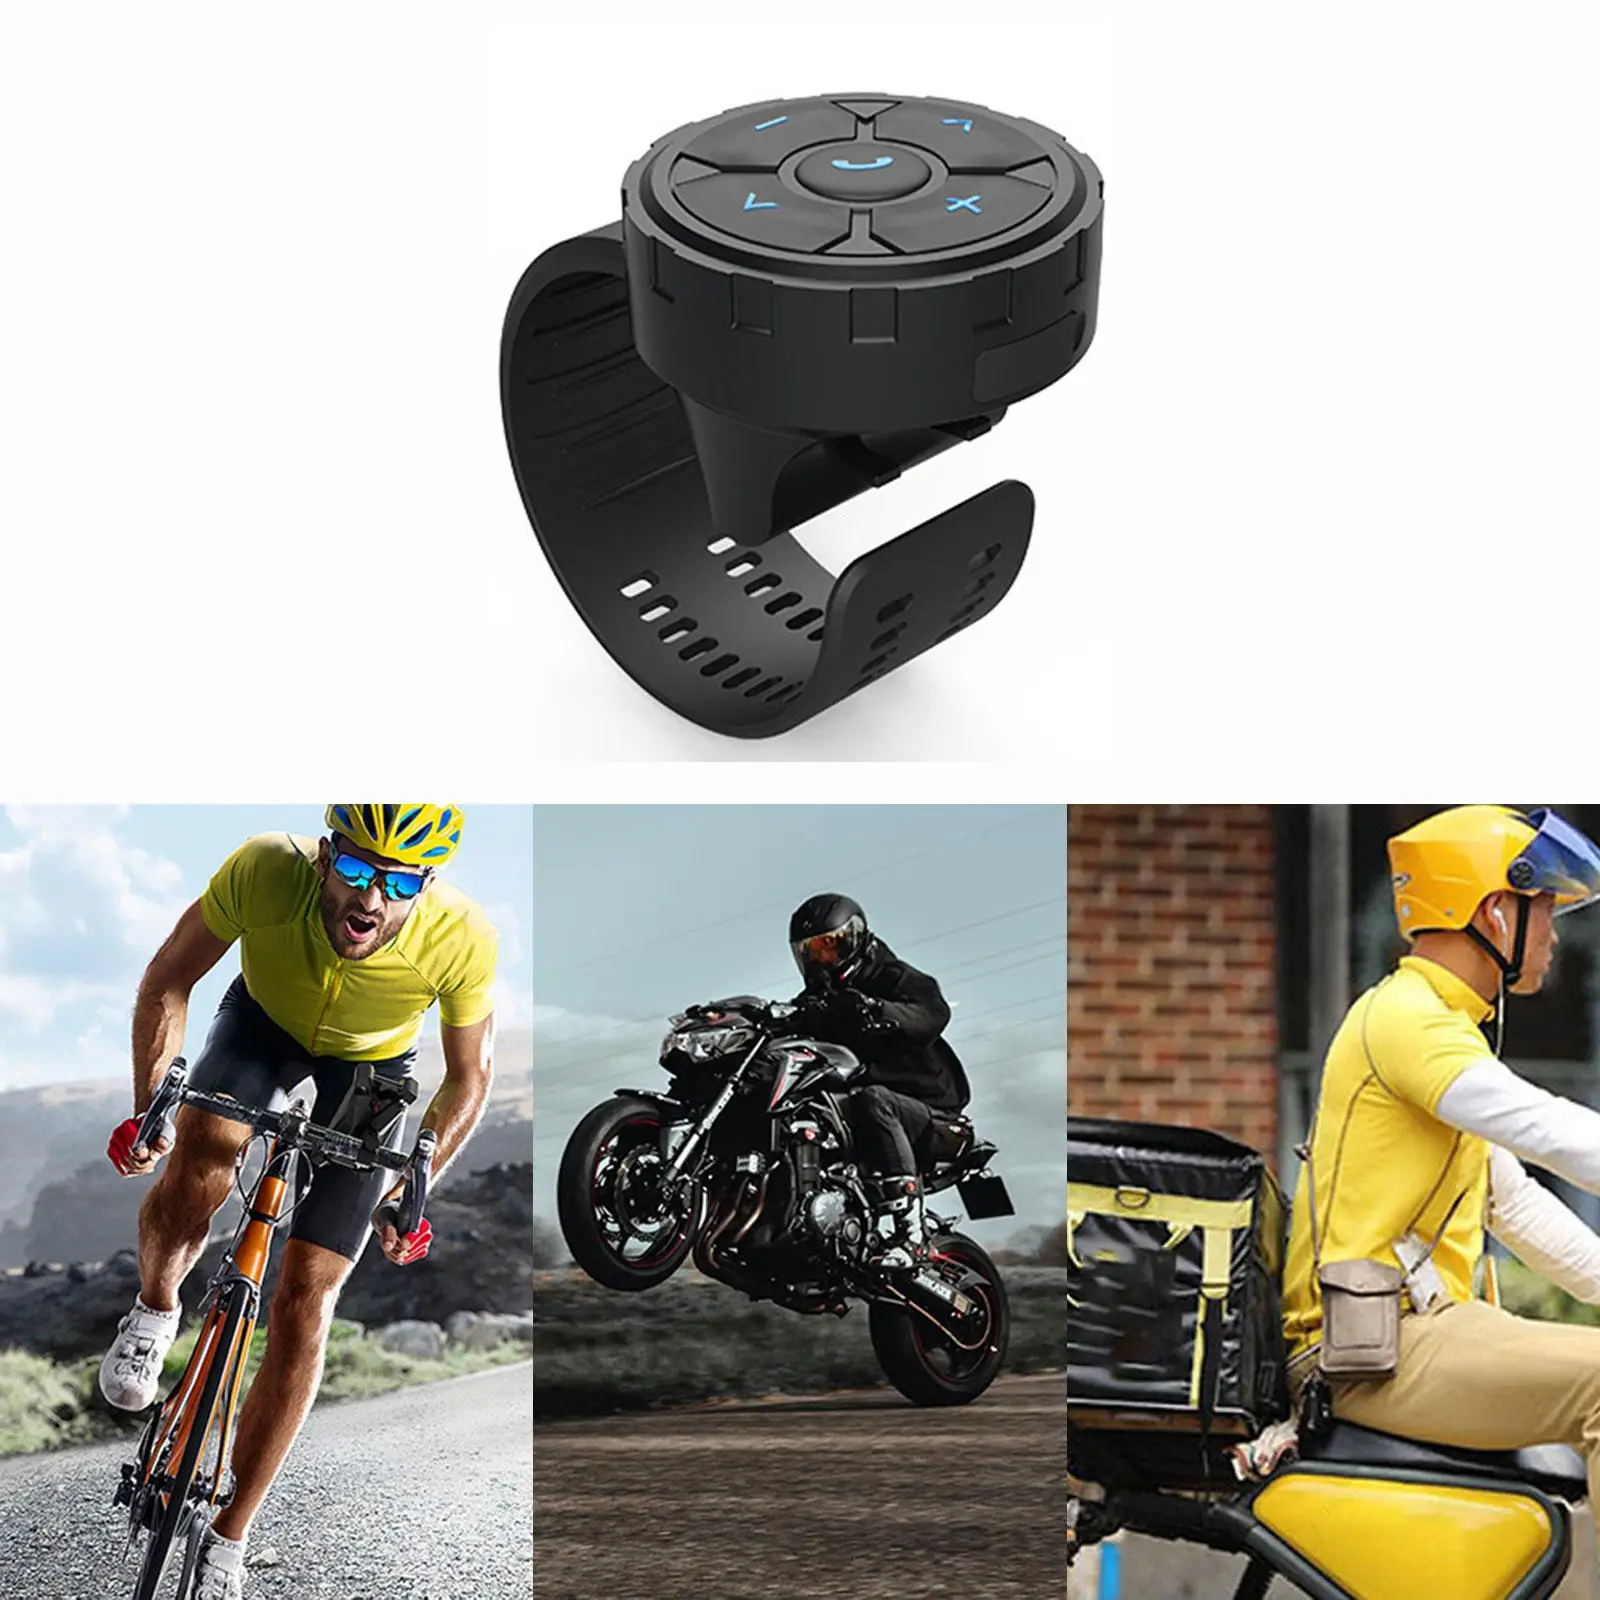 Steering Wheel Remote Control Styling Player for Bike Motorcycle